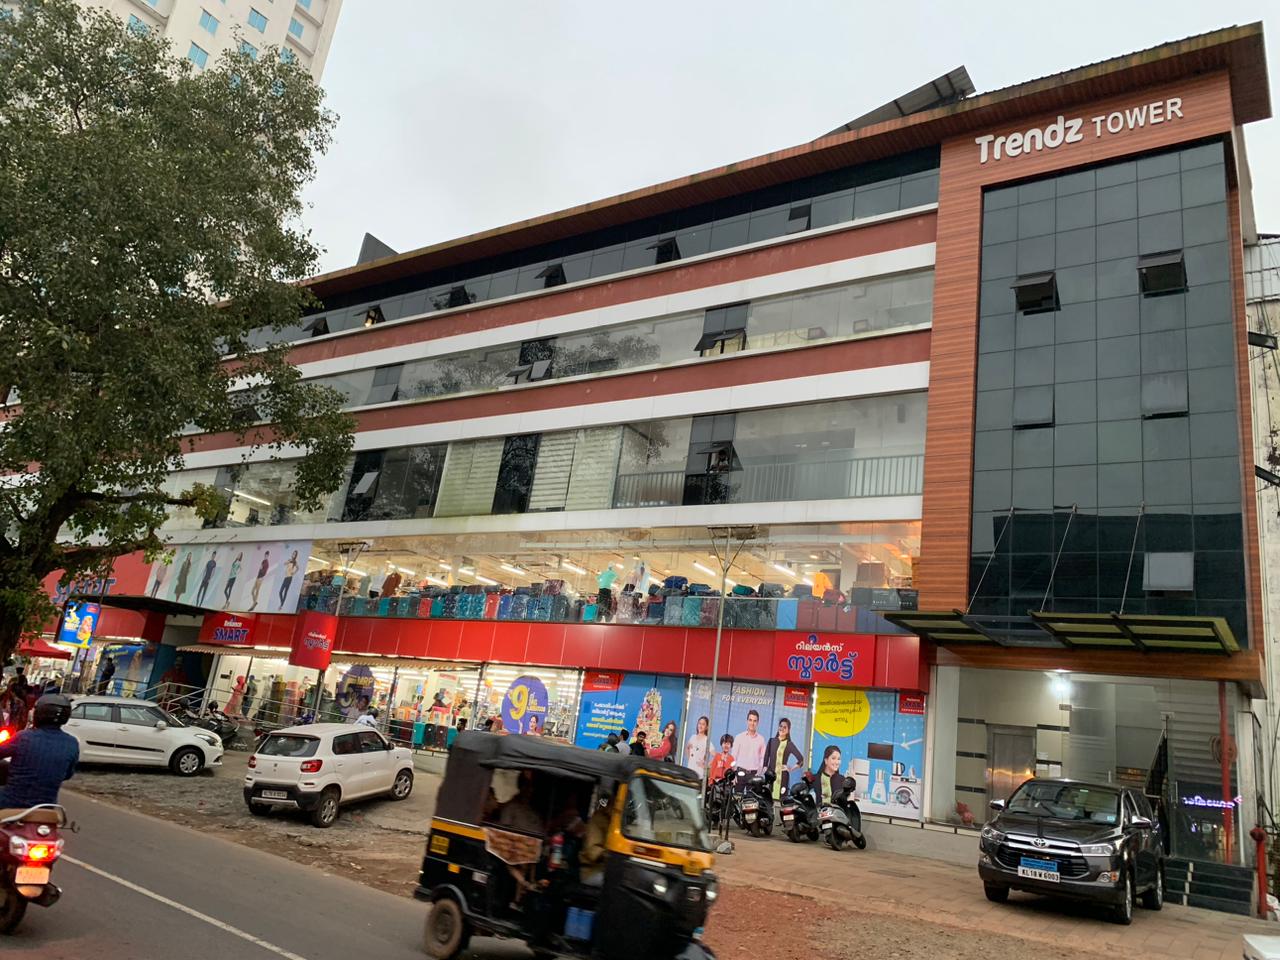 reliance smart mall of best architects firm in calicut